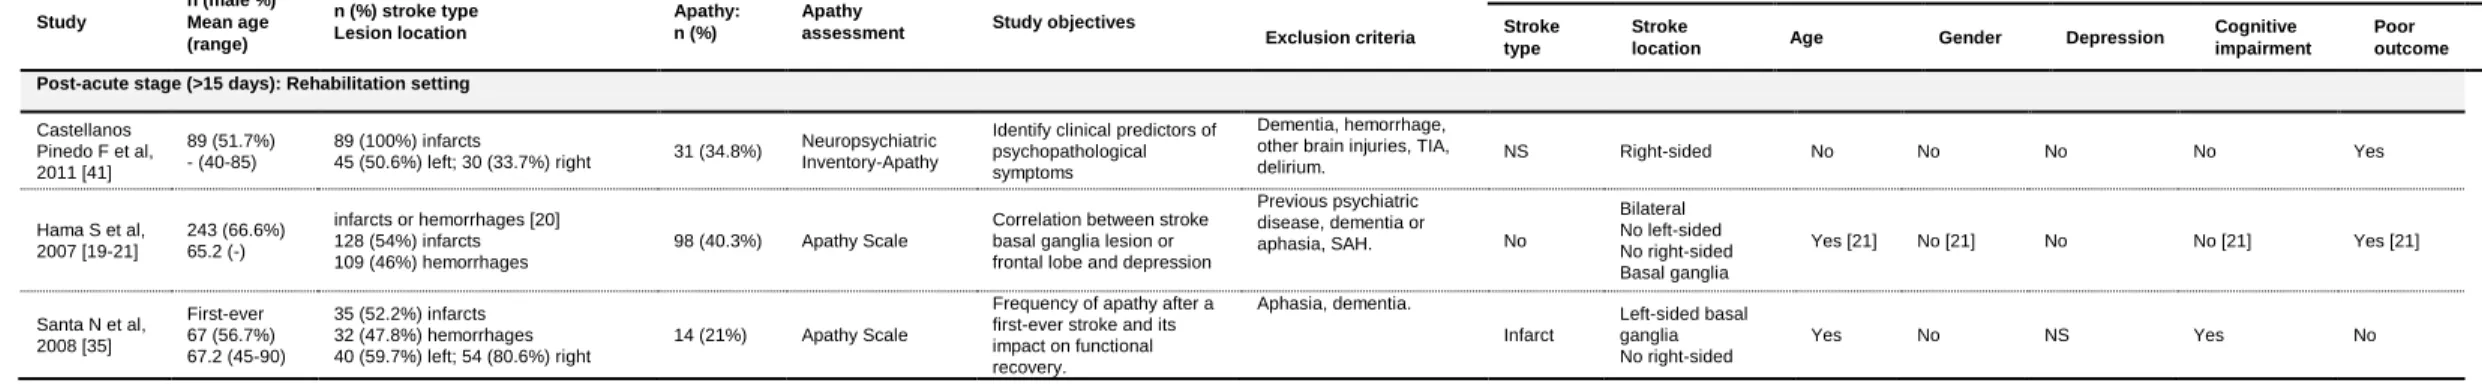 Table 1. Study characteristics. (cont.)  Study  n (male %) Mean age  (range)  n (%) stroke type Lesion location  Apathy: n (%)  Apathy 